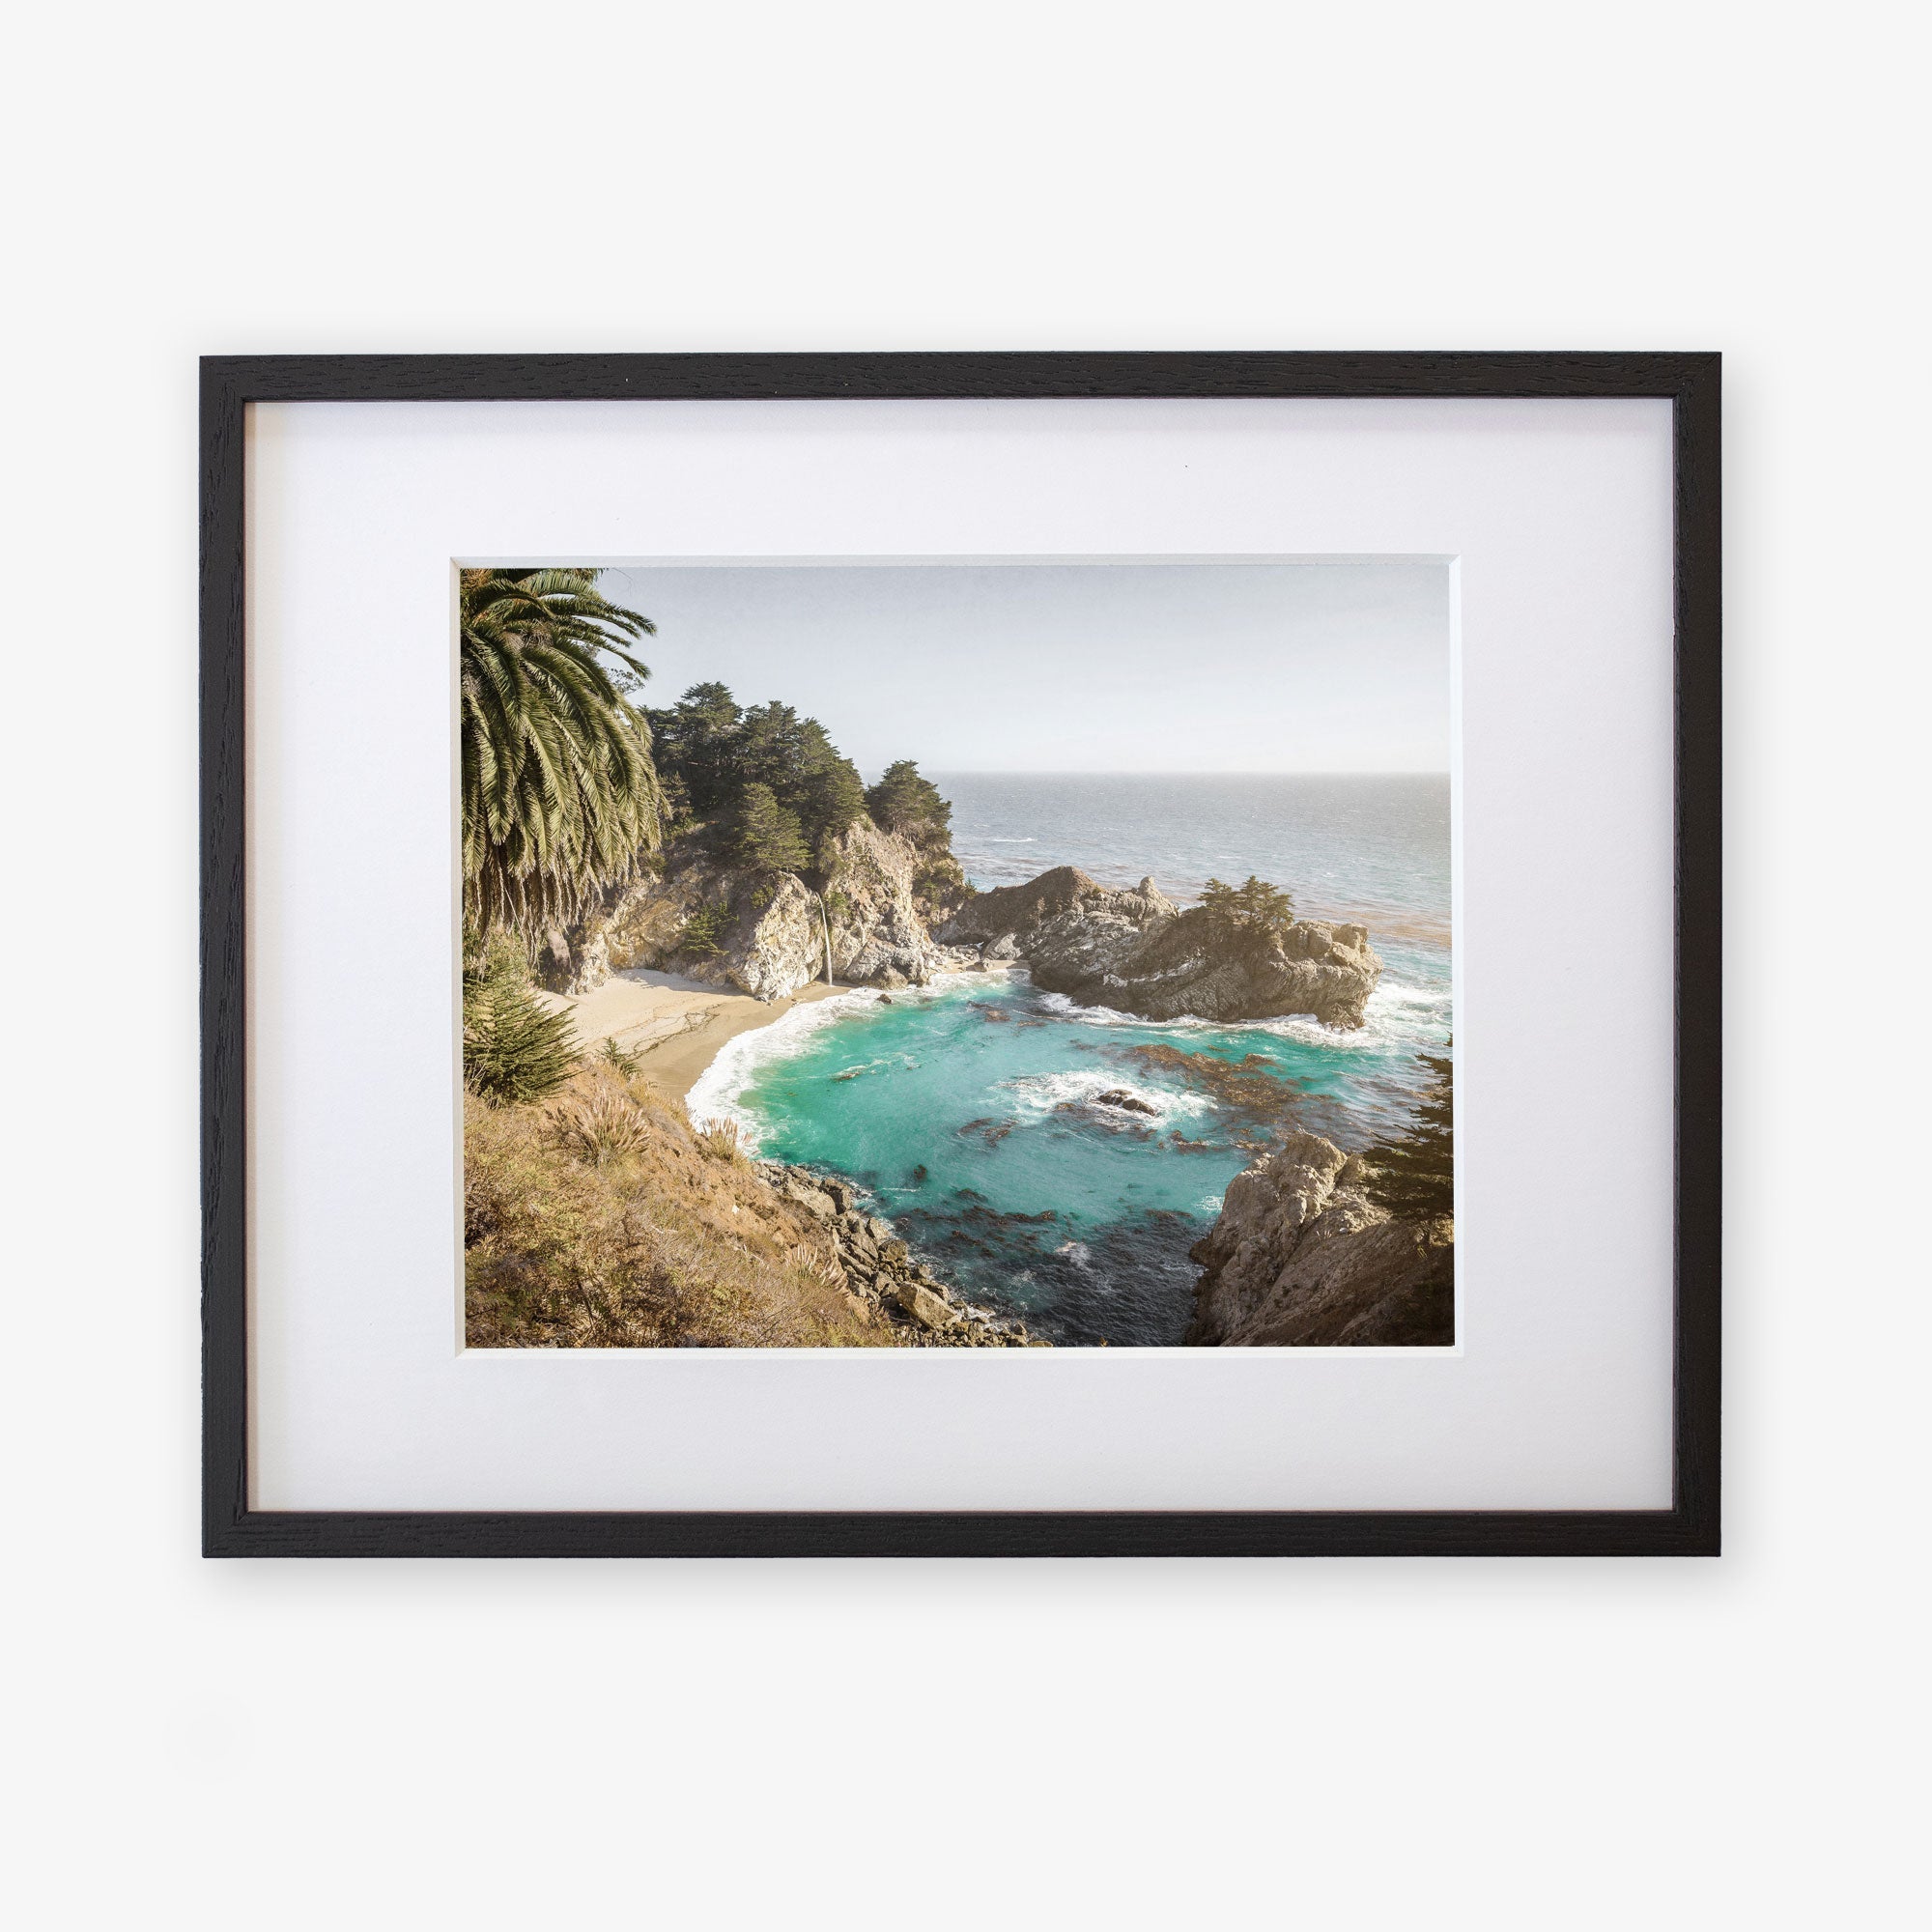 Framed photograph of a Big Sur Coastal Print &#39;Julia Pffeifer&#39; wall art view with rocky cliffs and turquoise waters, surrounded by green foliage and a sandy beach by Offley Green.